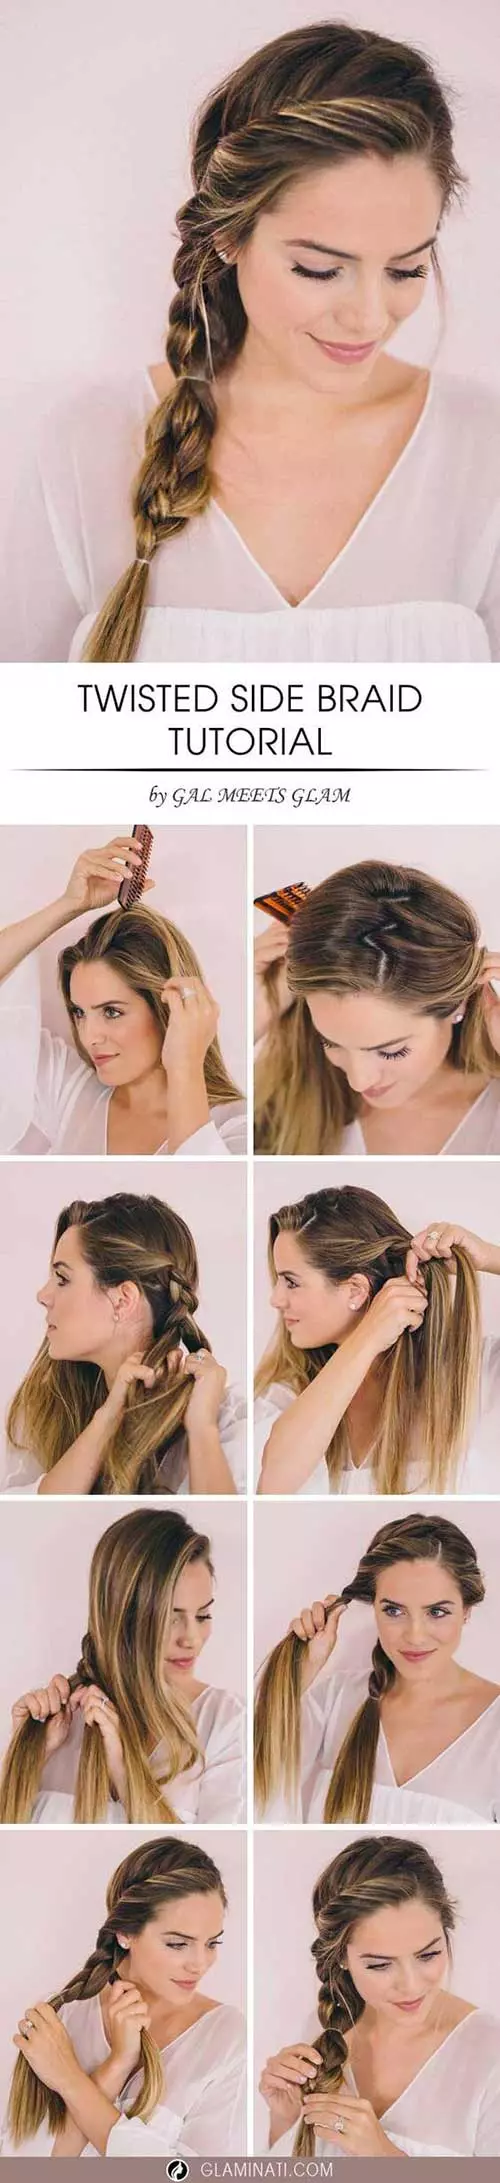 Twisted Side Braid.(SIMPLE) Hairstyle For Long Hair Girls